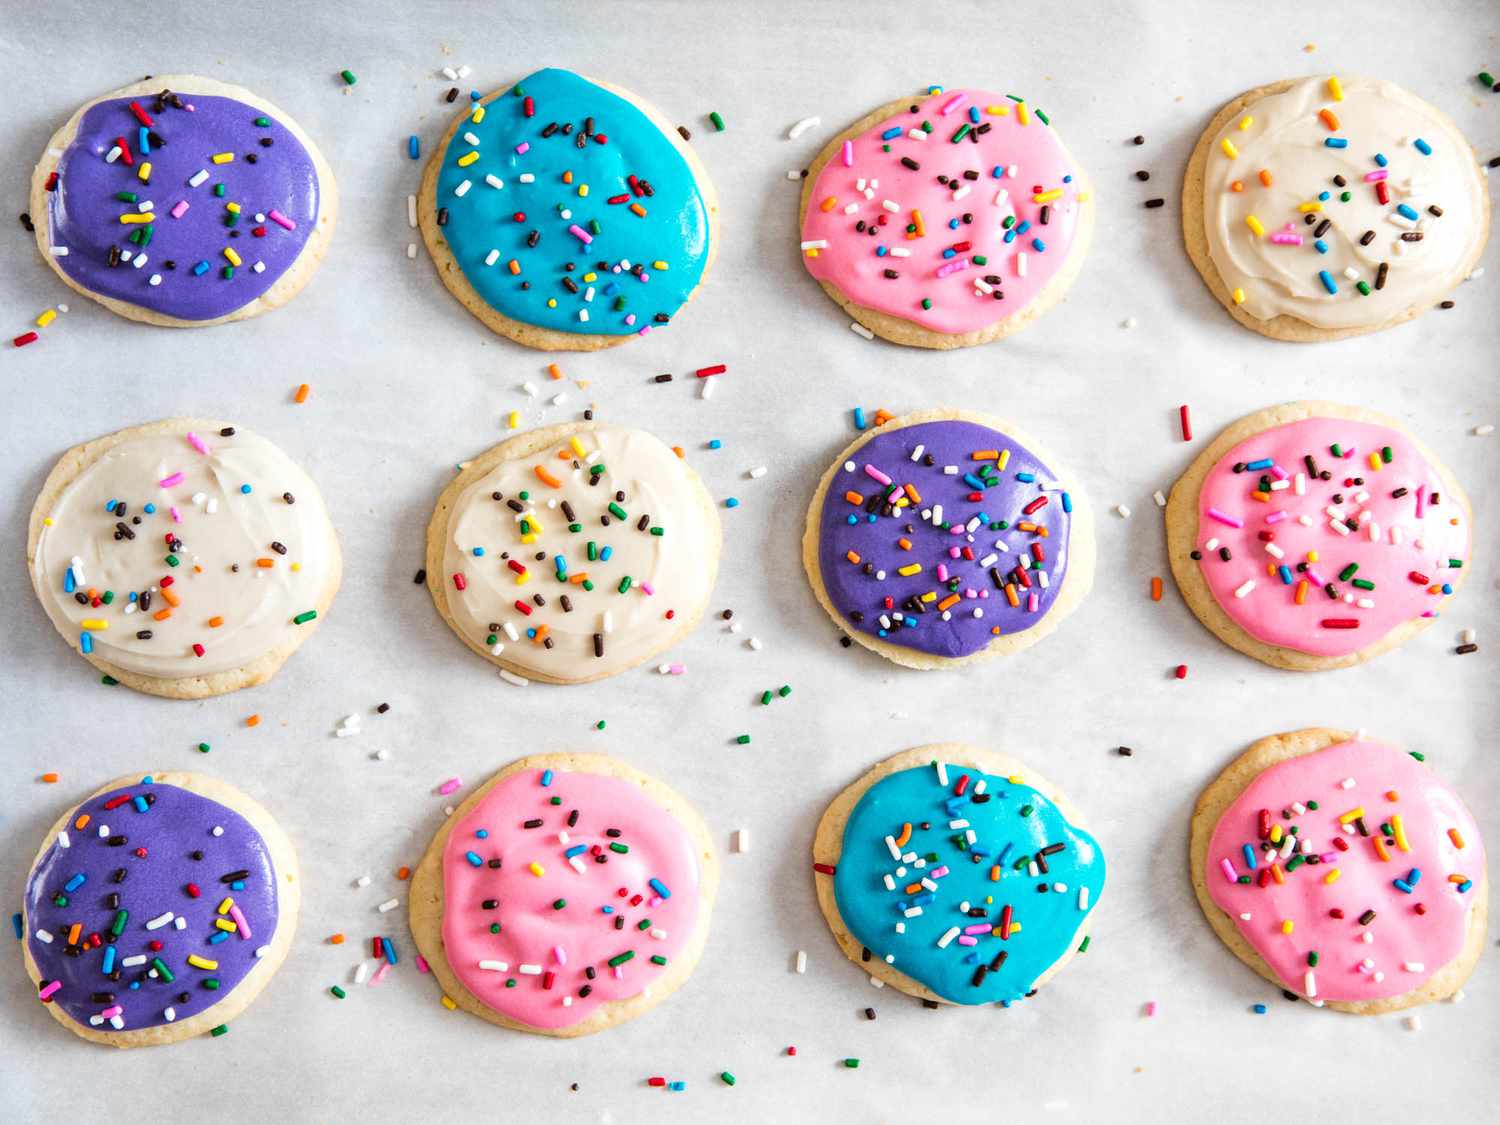 Overhead shot of colorfully frosted sugar cookies covered in sprinkles.